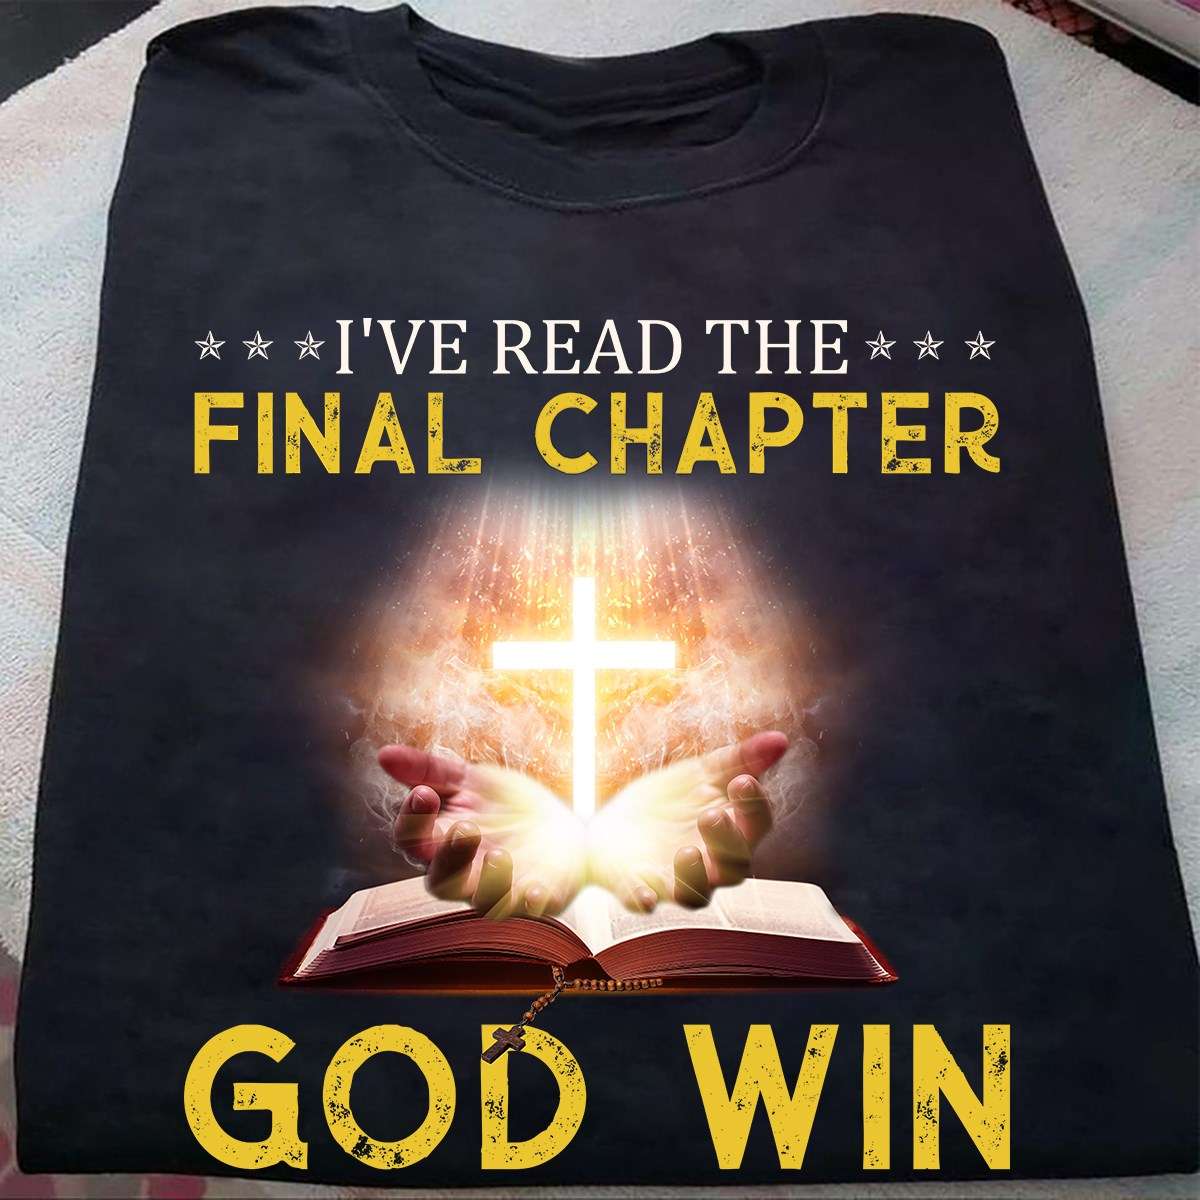 I've read the final chapter god win - Holy Bible, Believing in God